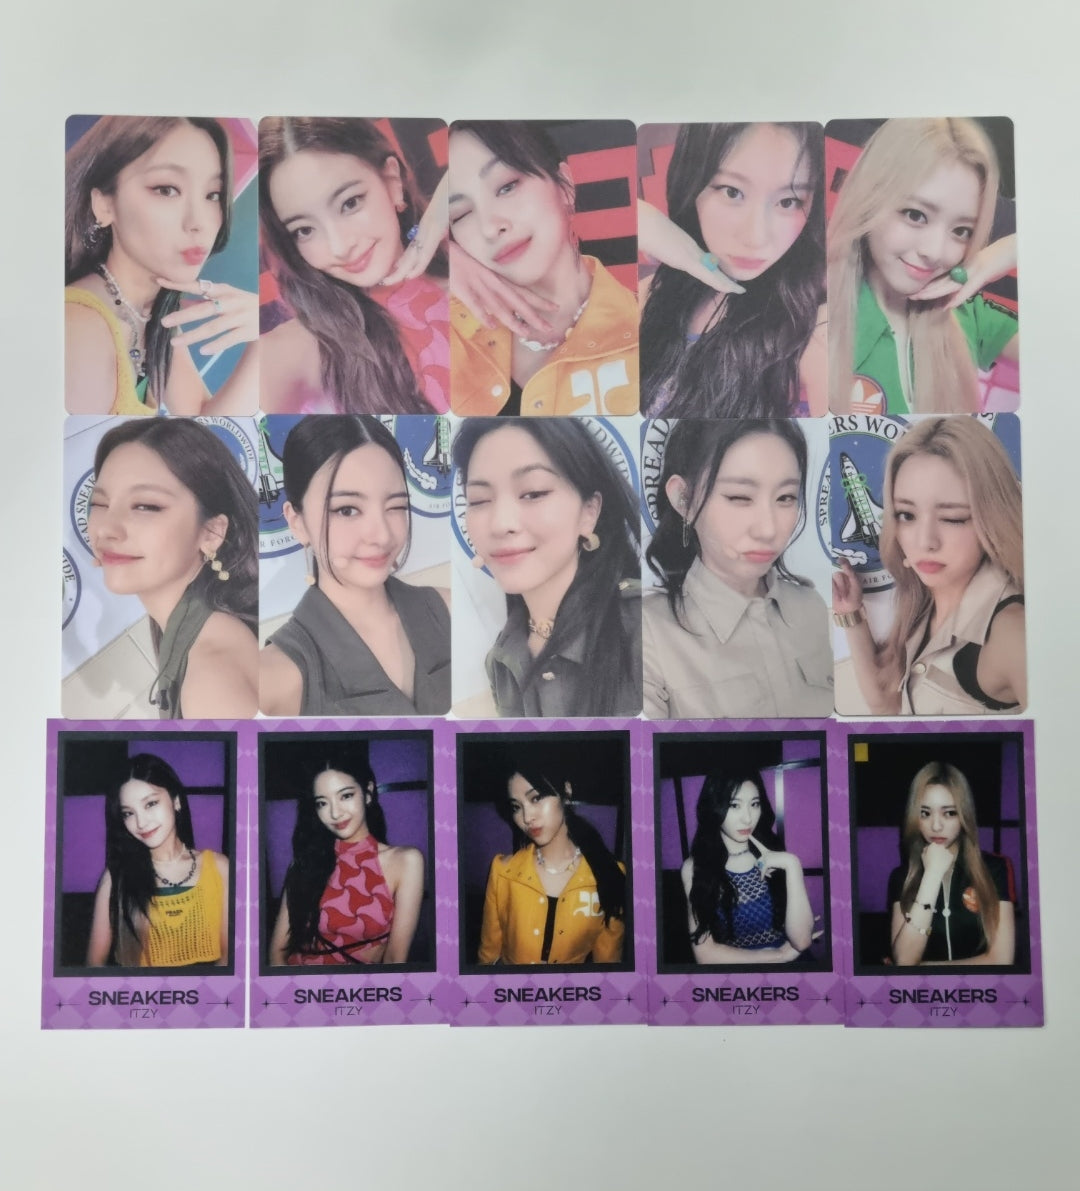 DraggmePartty 2Pcs/Set Kpop Itzy Poster Album Checkmate Wall Sticker Home  Decor For Fans Collection